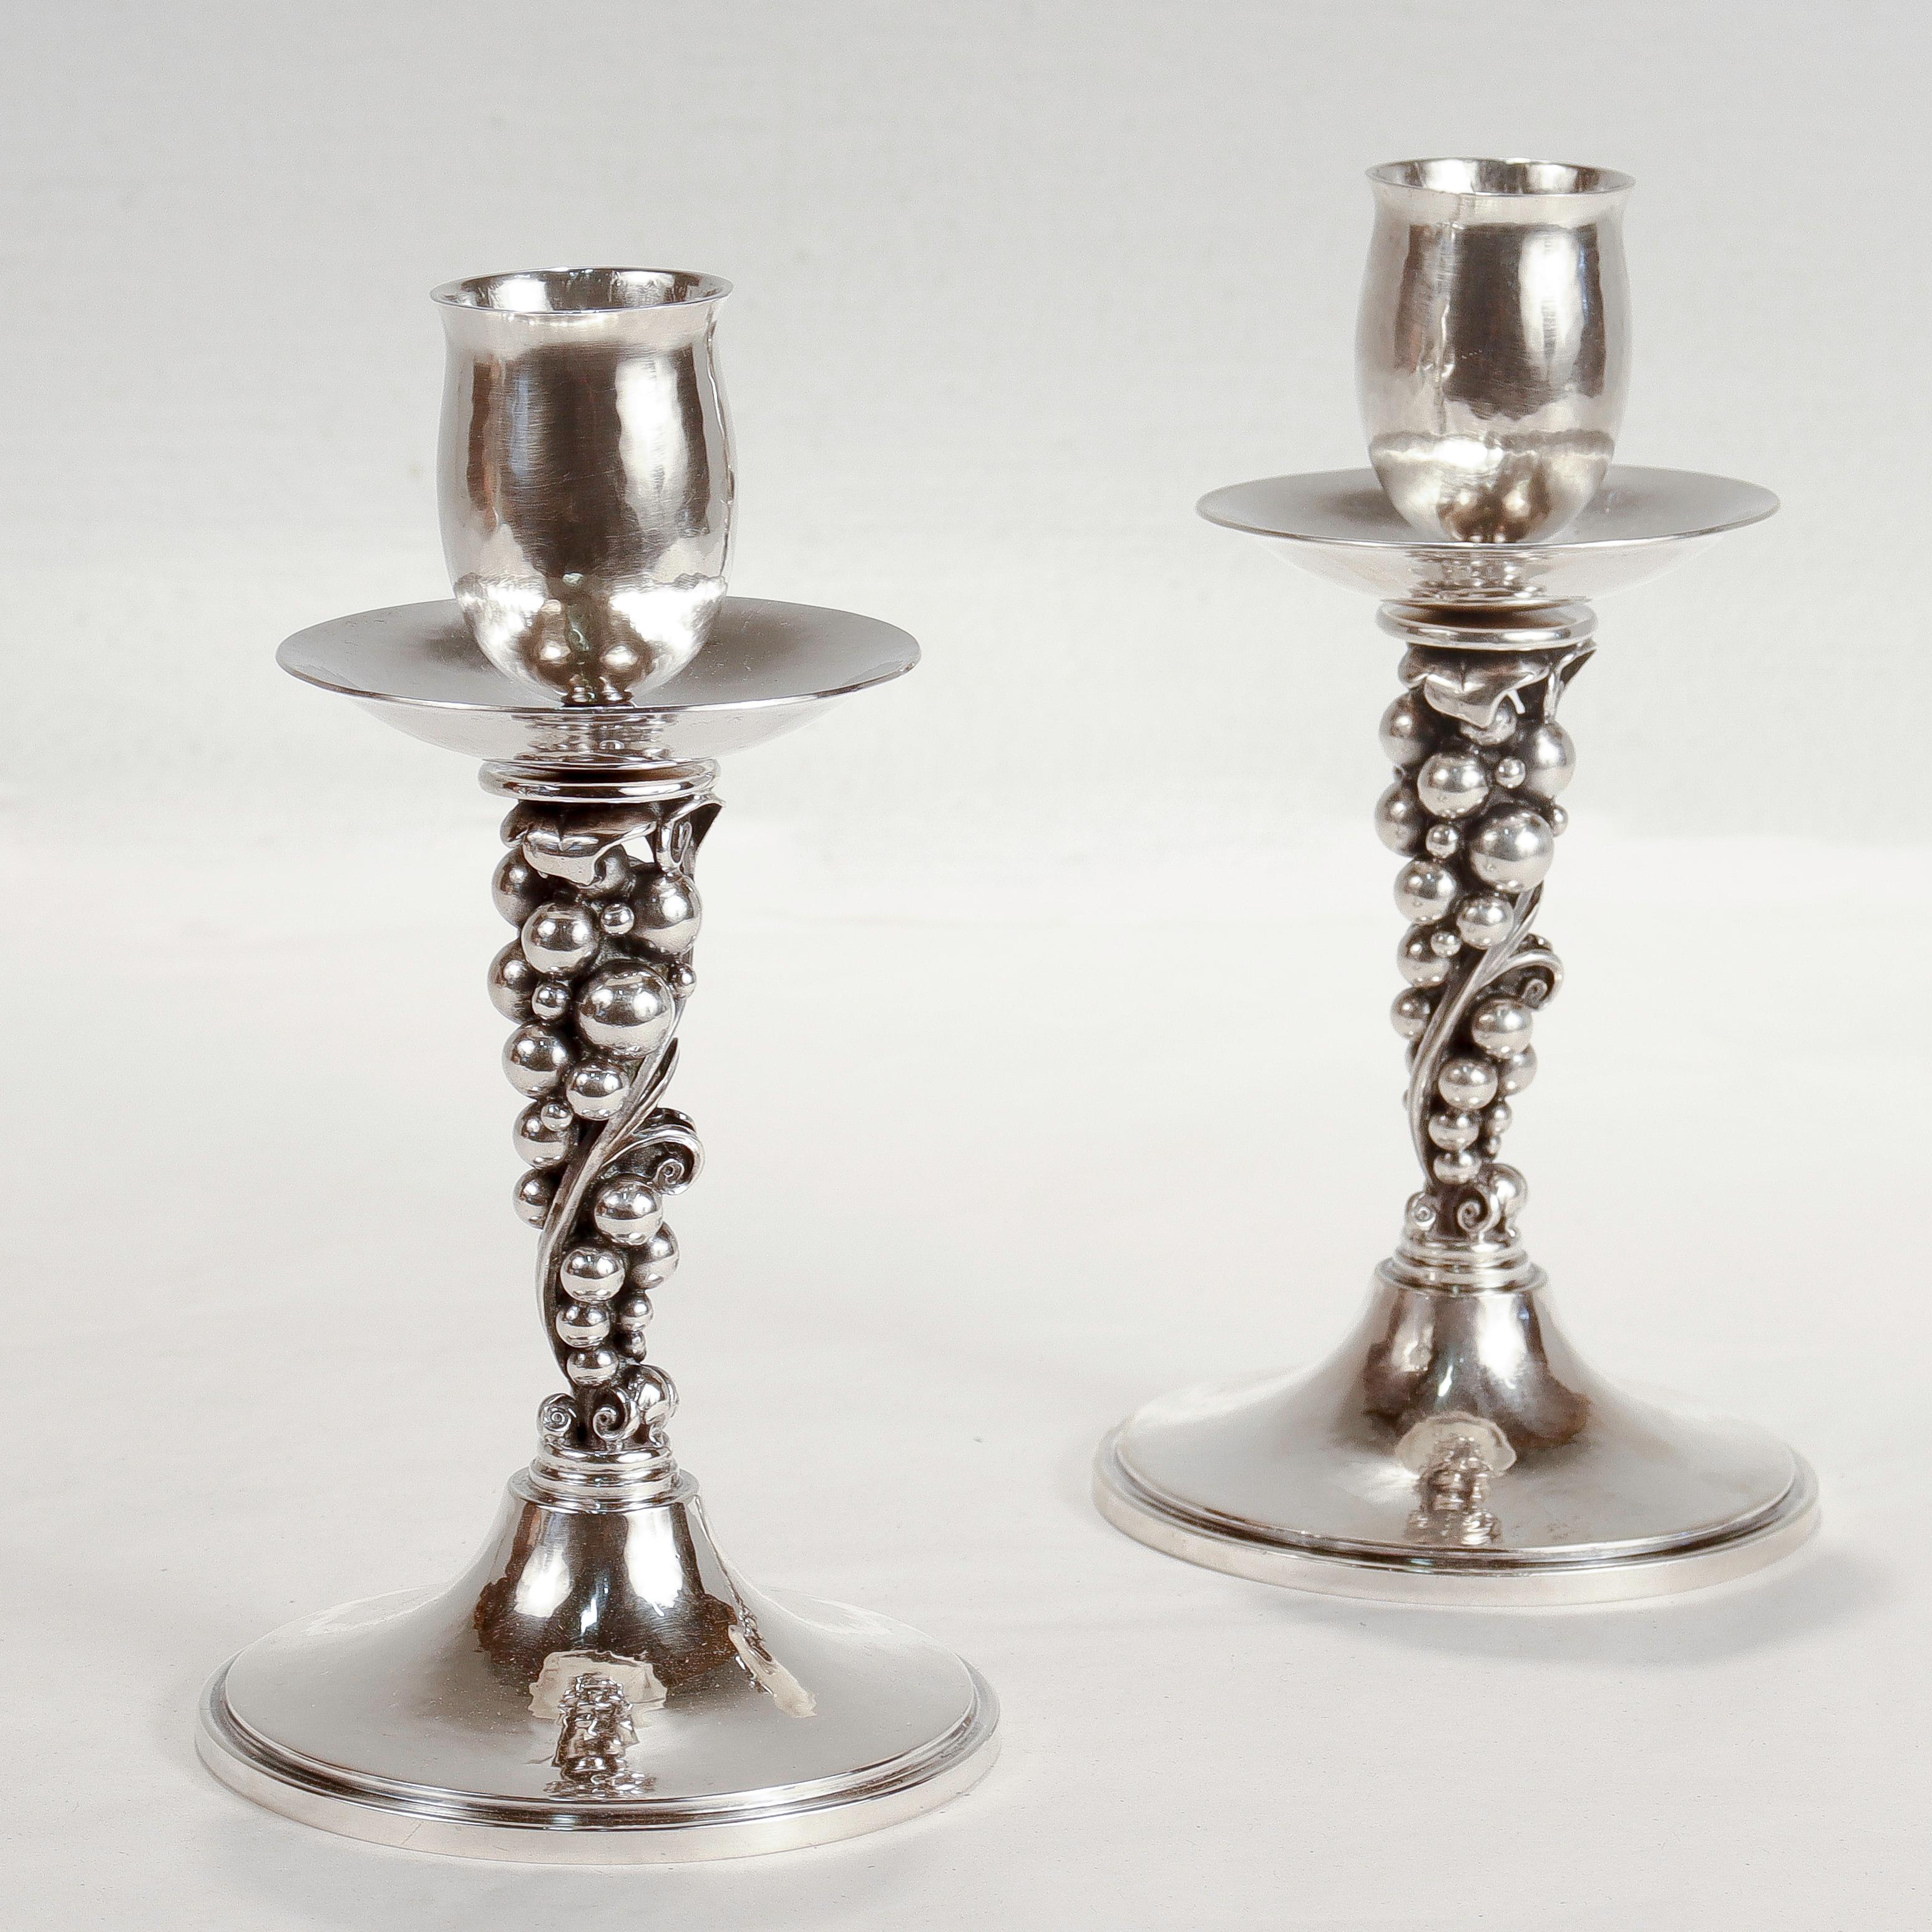 Pair of Signed Danish Modern Sterling Silver Grapes Candlesticks by Aage Weimar For Sale 1